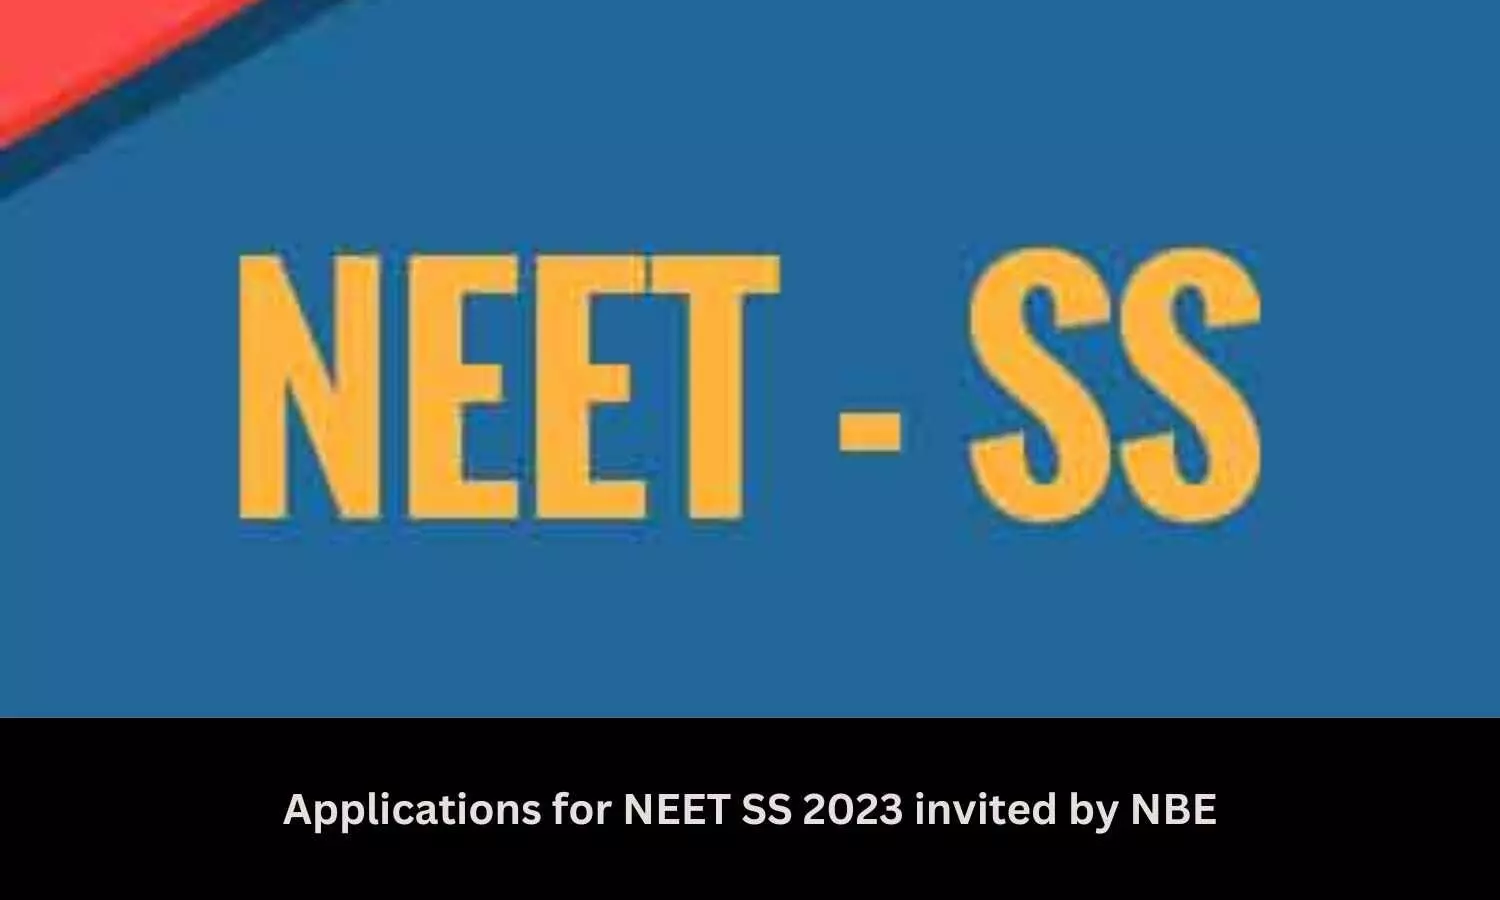 Applications for NEET SS 2023 invited by NBE